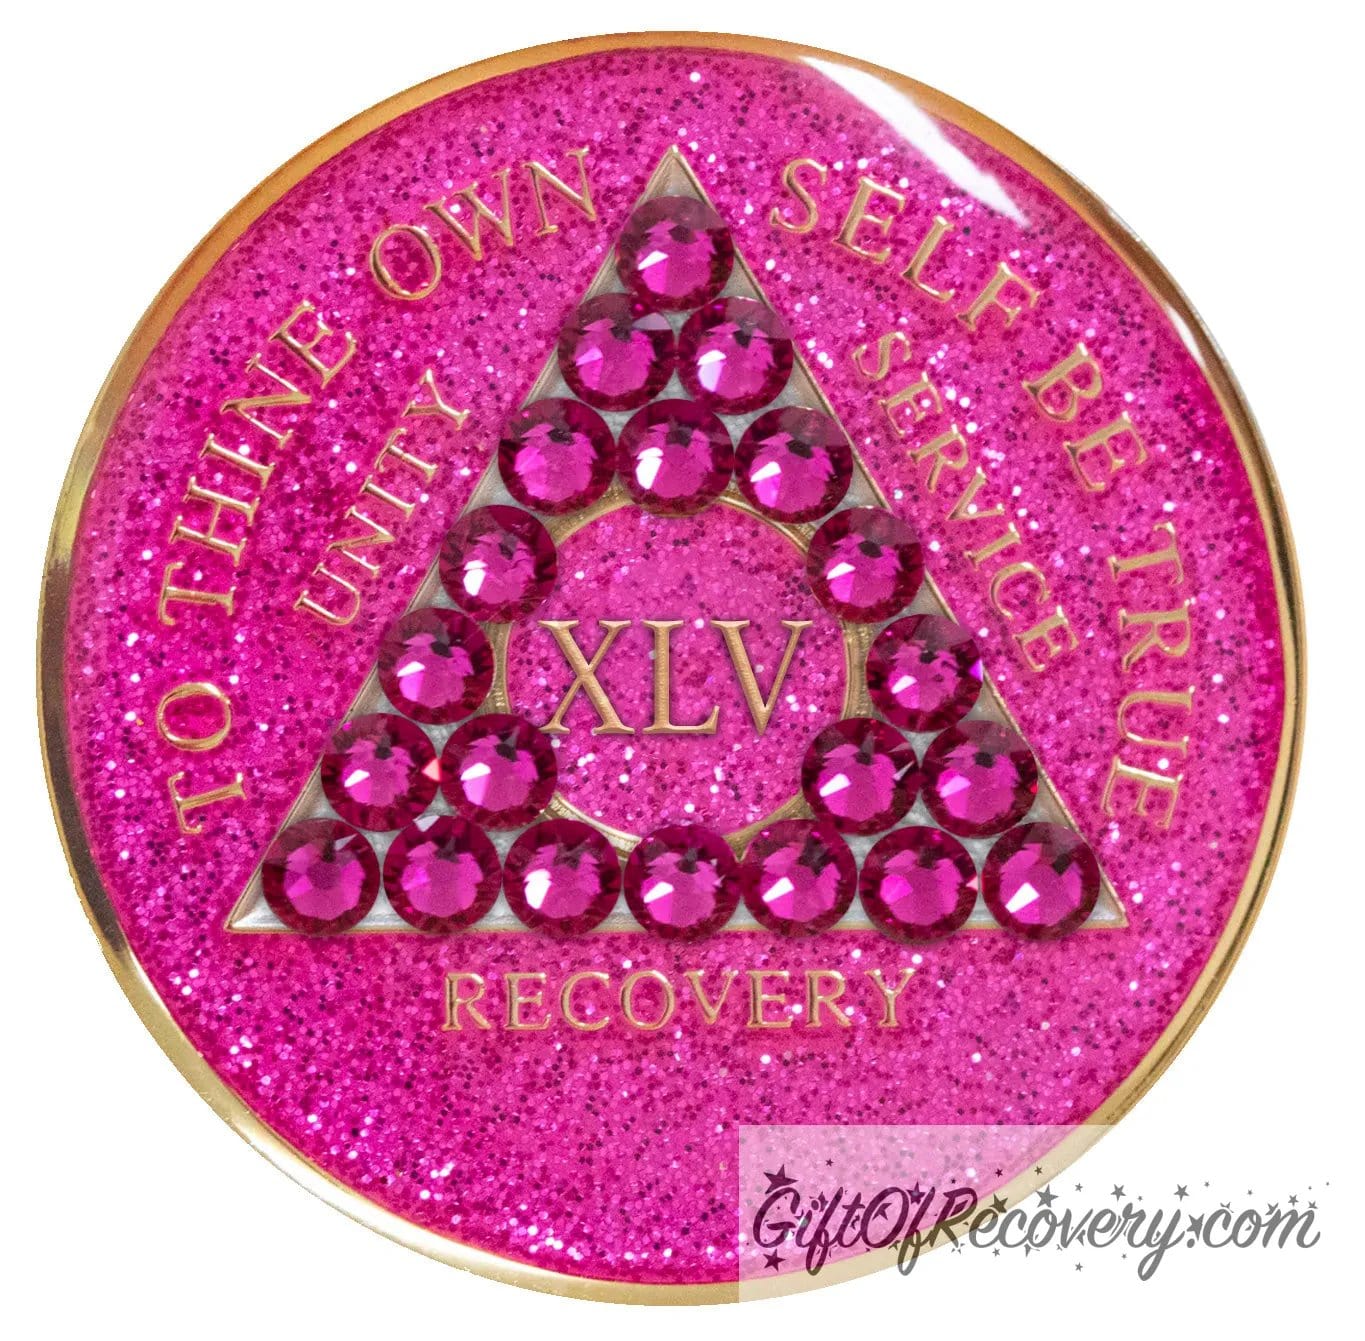 45 year Princess Pink Glitter AA medallion with 21 genuine fuchsia crystals in the shape of a triangle in the center of the recovery medallion, for your favorite sober princess, and to thine own self be true, unity, service, recovery, the roman numeral in the middle, and the outer rim, embossed in 14k plated brass, the aa medallion is sealed in resin for a shiny finish.